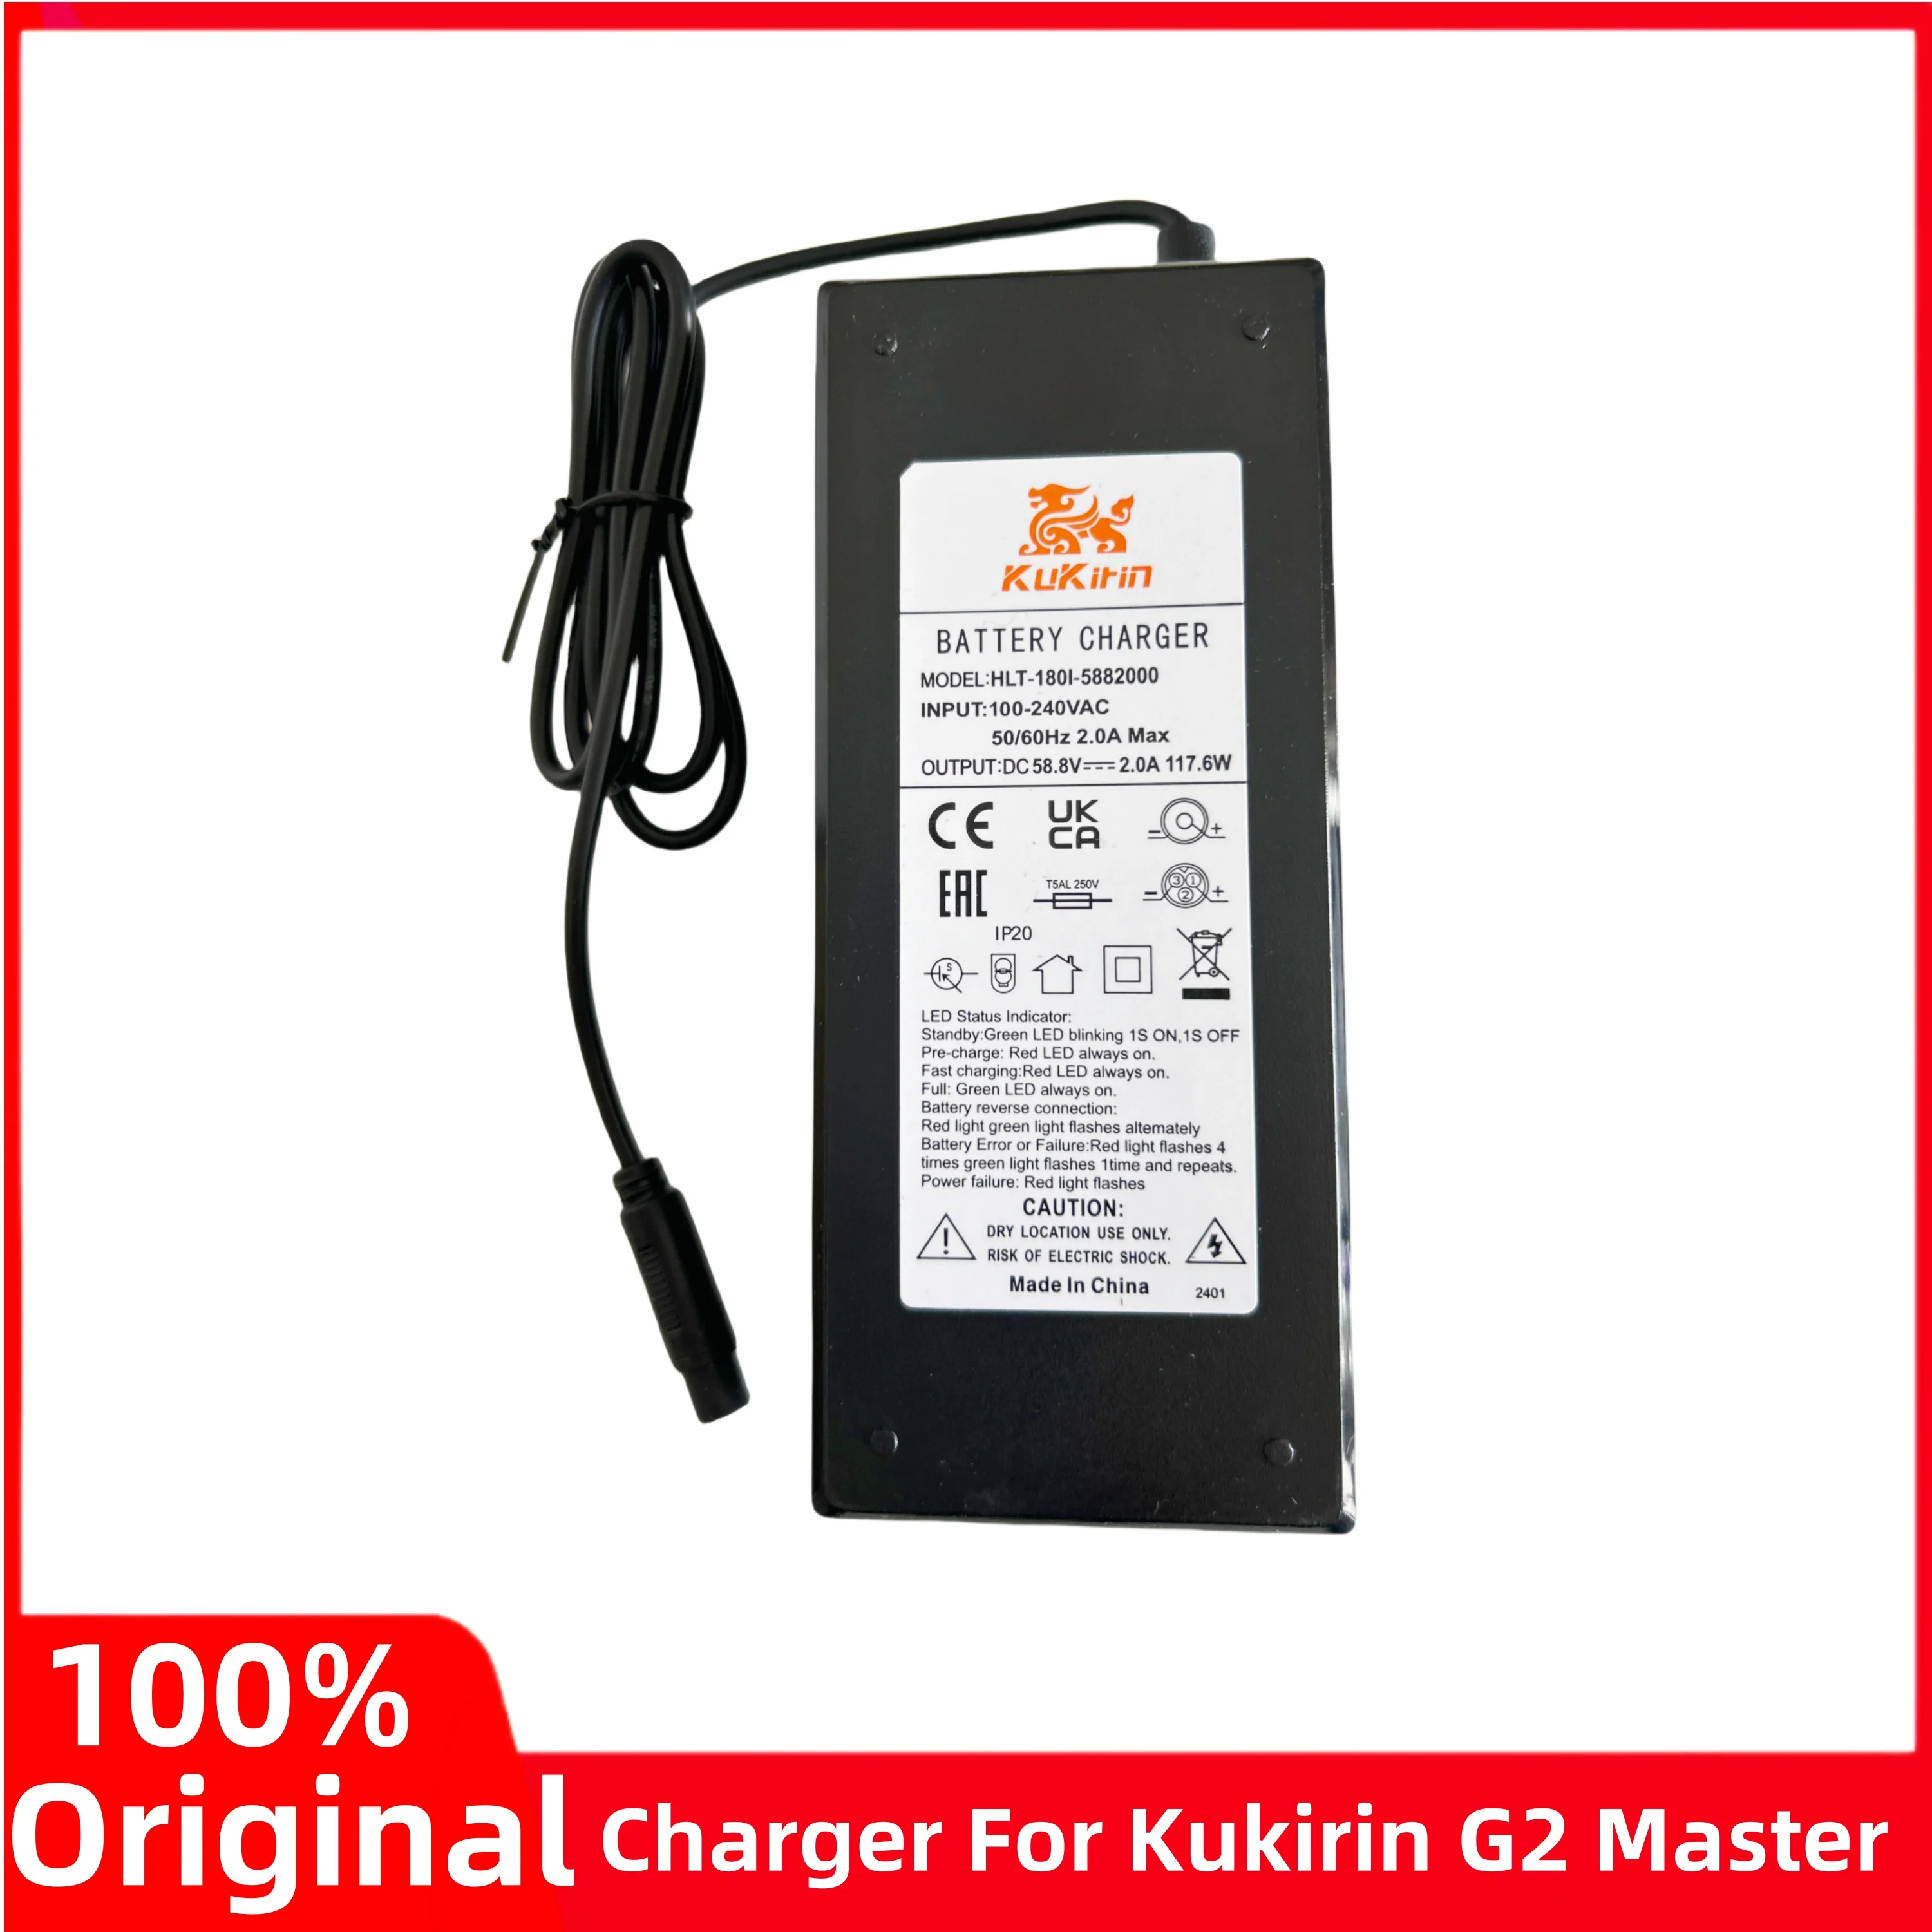 

Original 58.8V 2.0A Lithium Charger For Kugoo Kukirin G2 Master Electric Scooter Battery Charger Parts Replacement Accessories